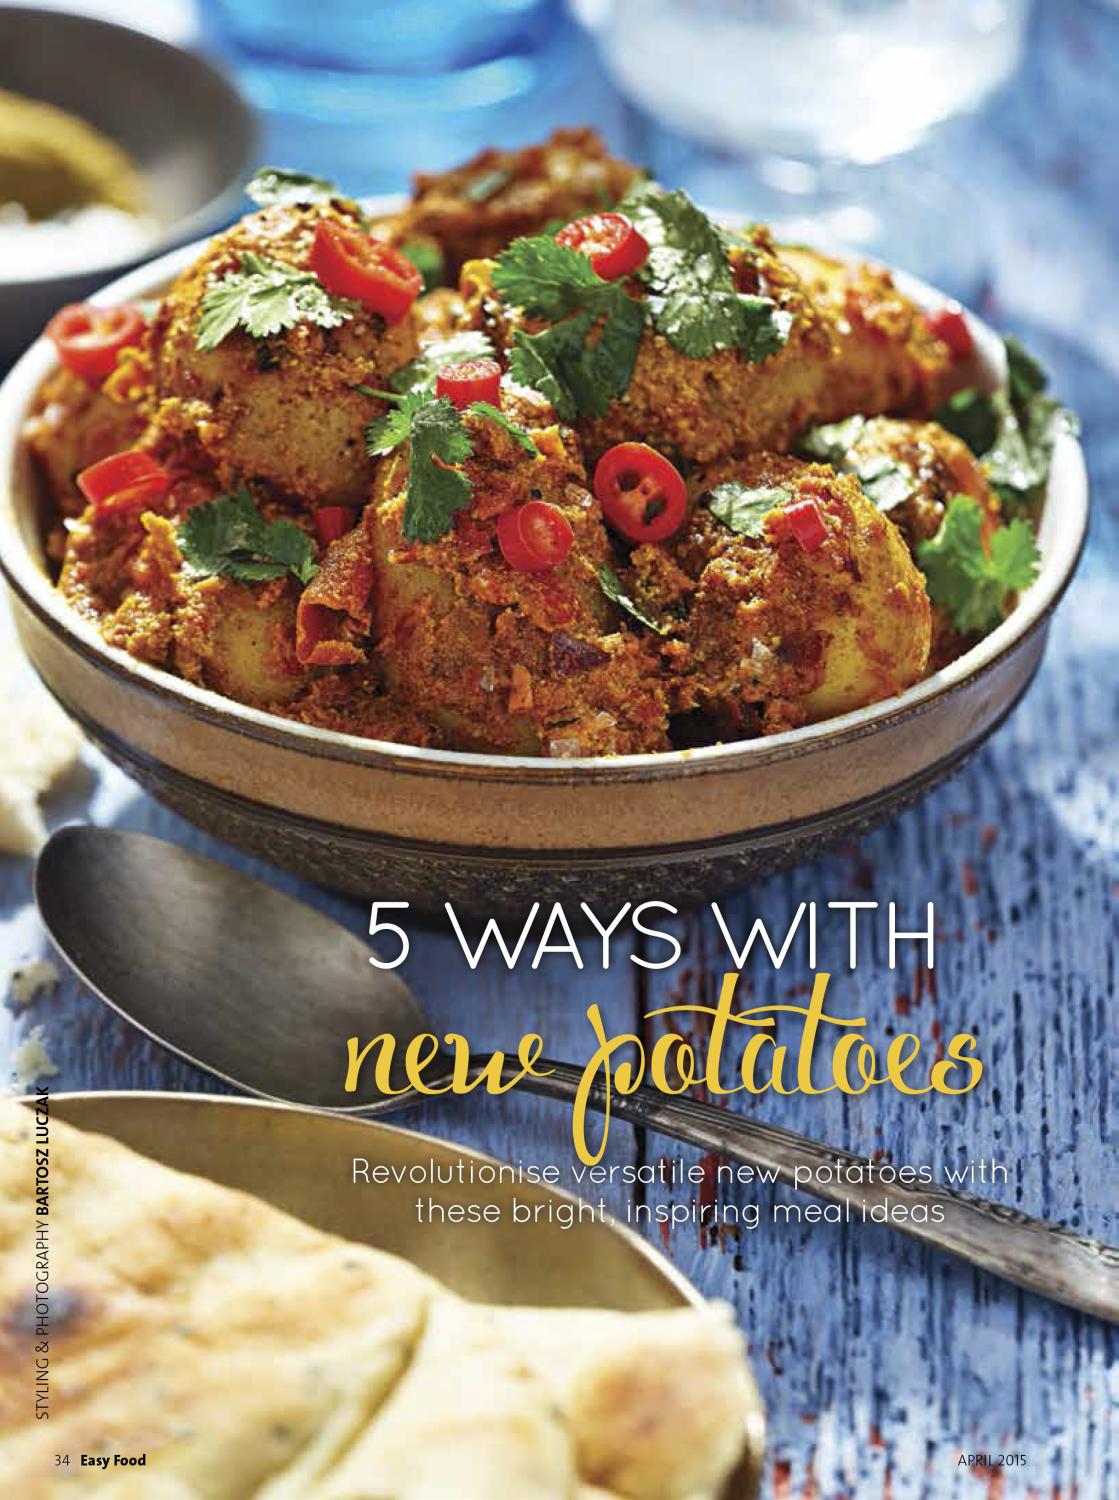 New potatoes feature, Easy Food magazine 